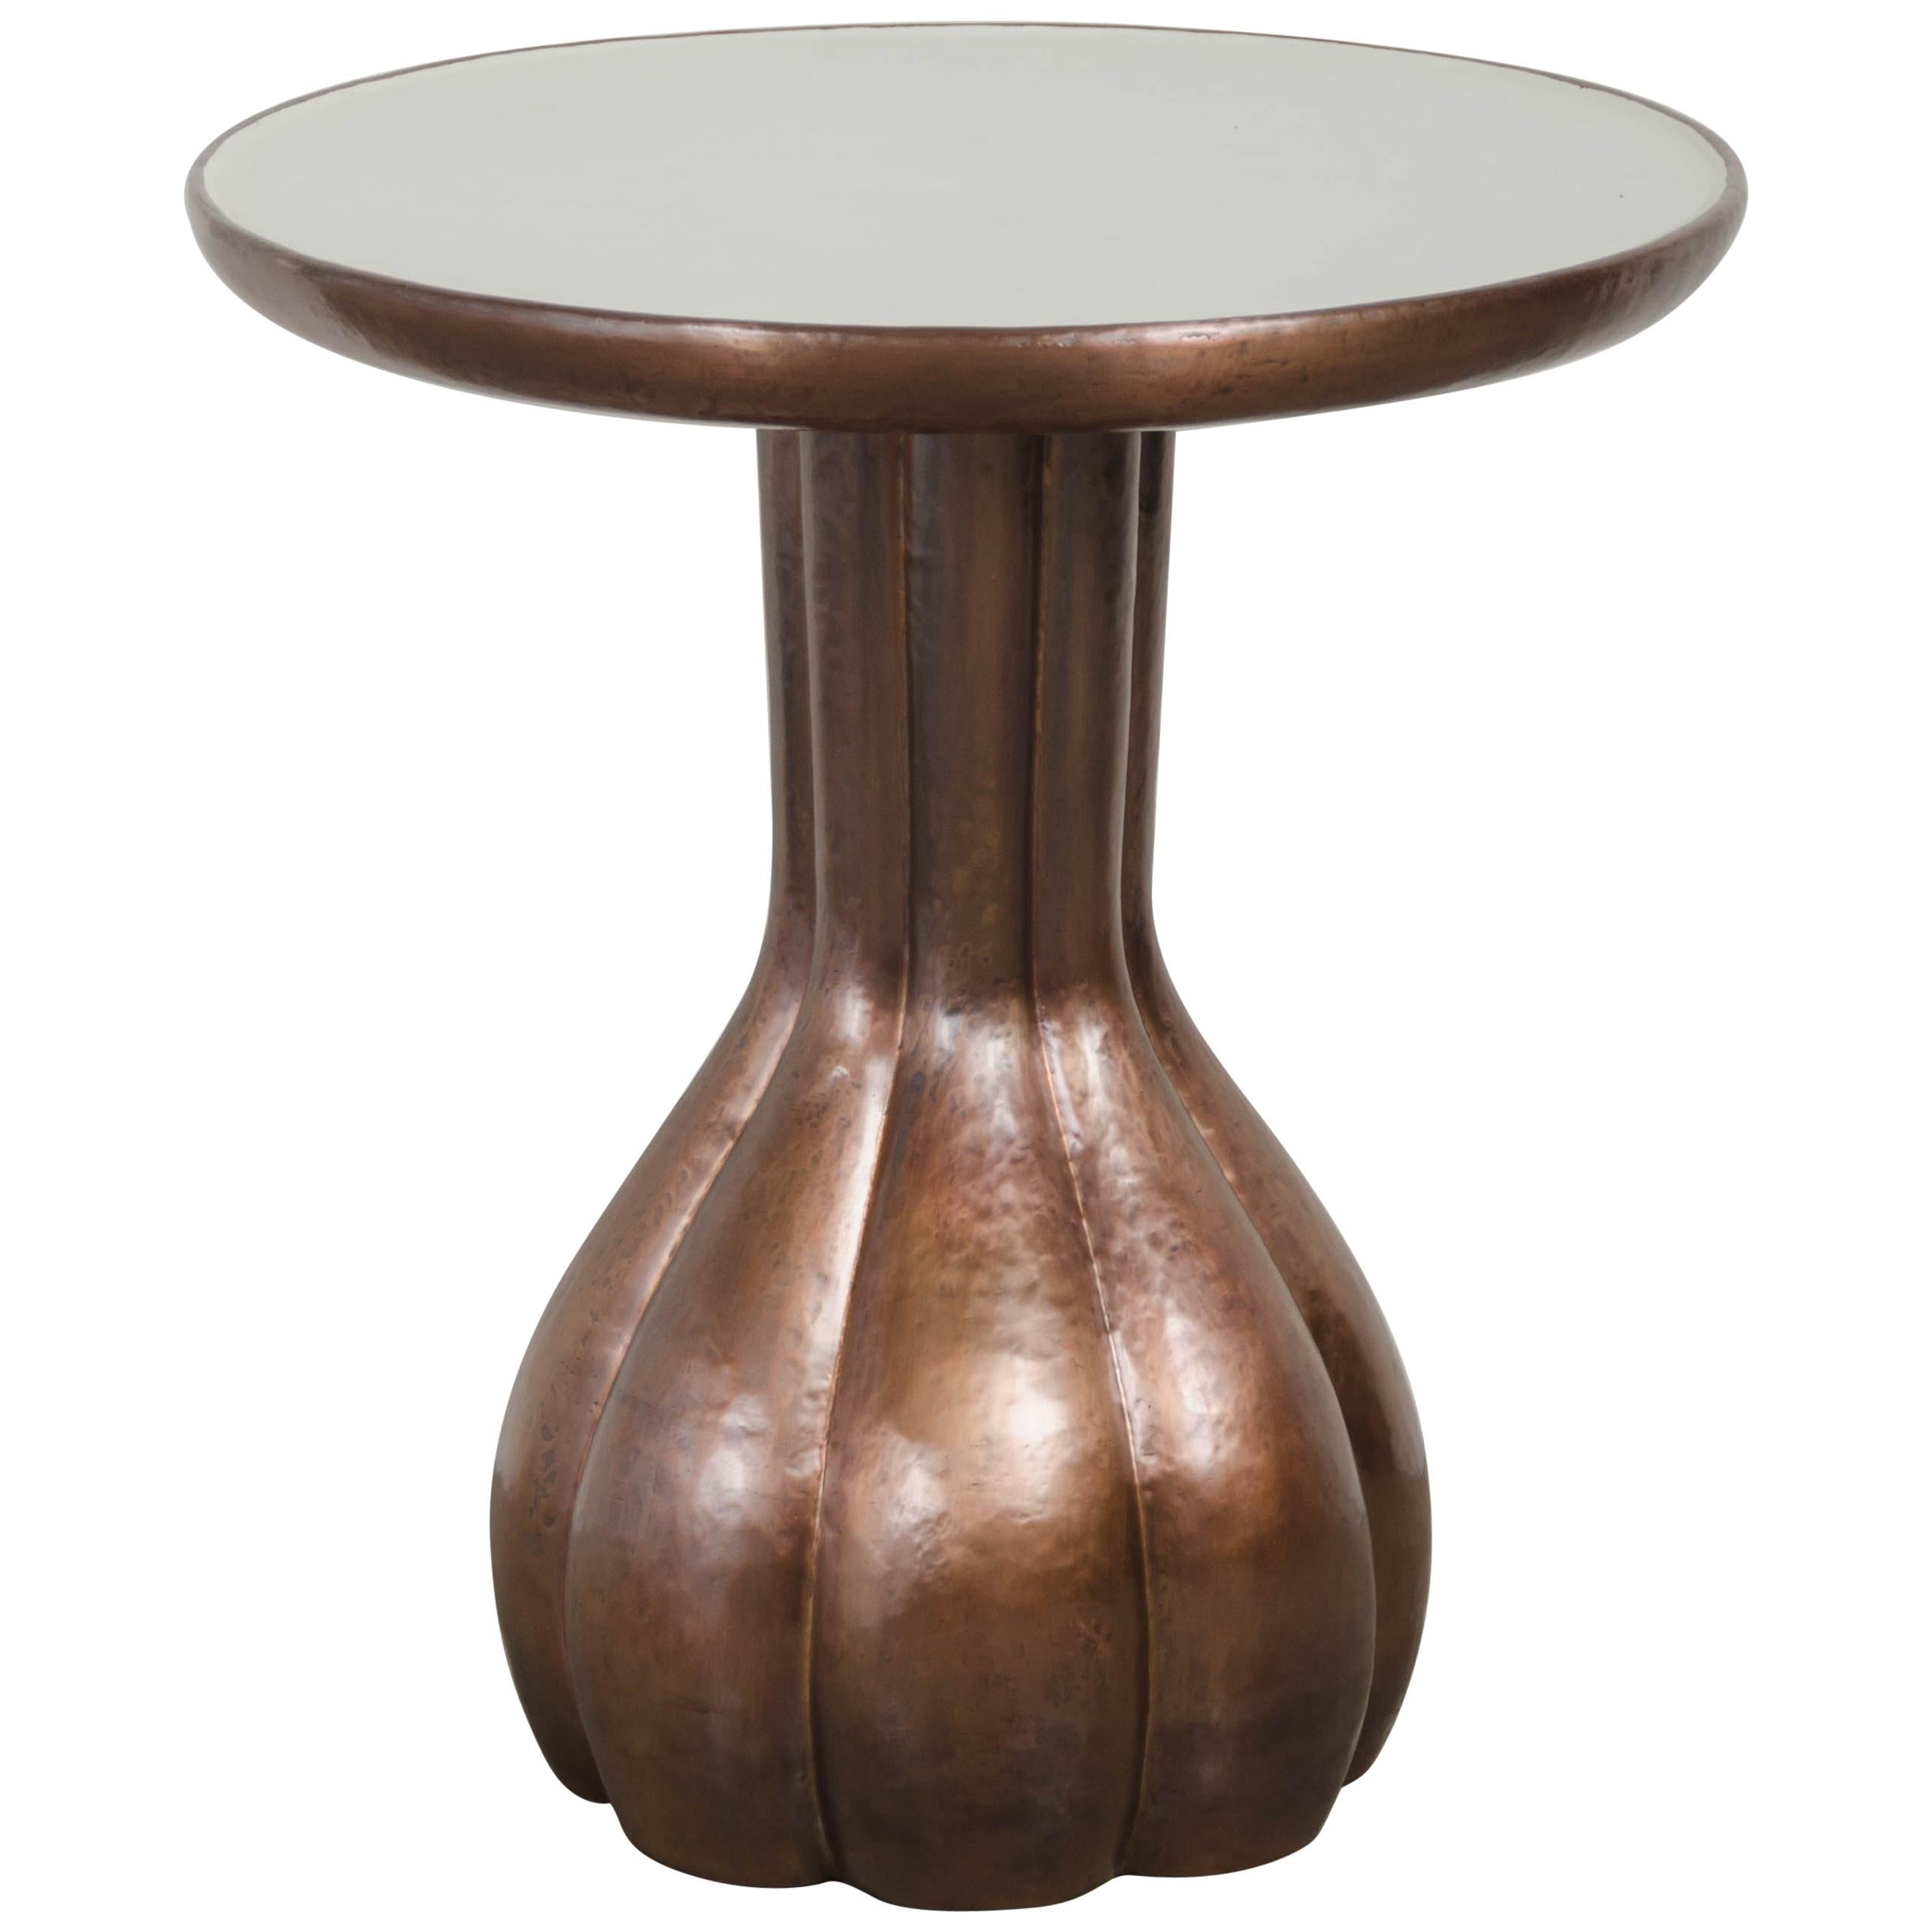 Lobed Le Verre Table - Cream Lacquer and Copper by Robert Kuo, Limited Edition